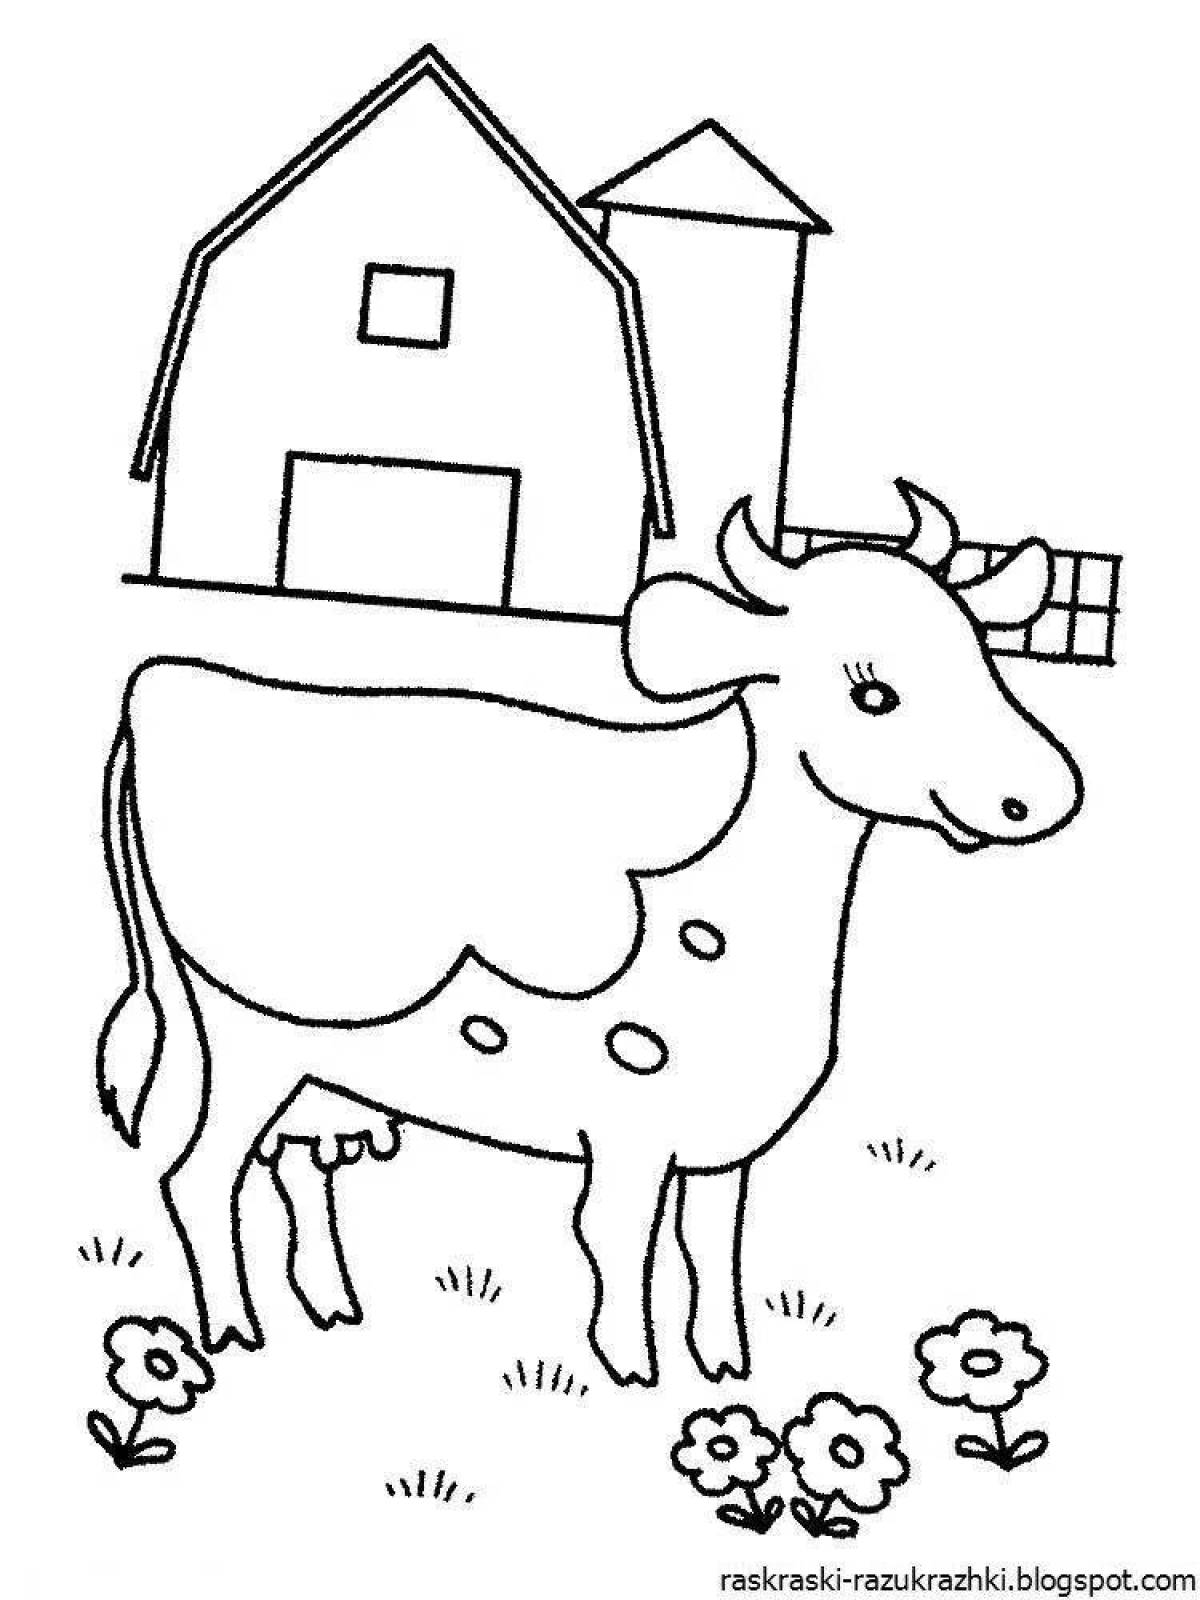 Coloring page happy village for kids